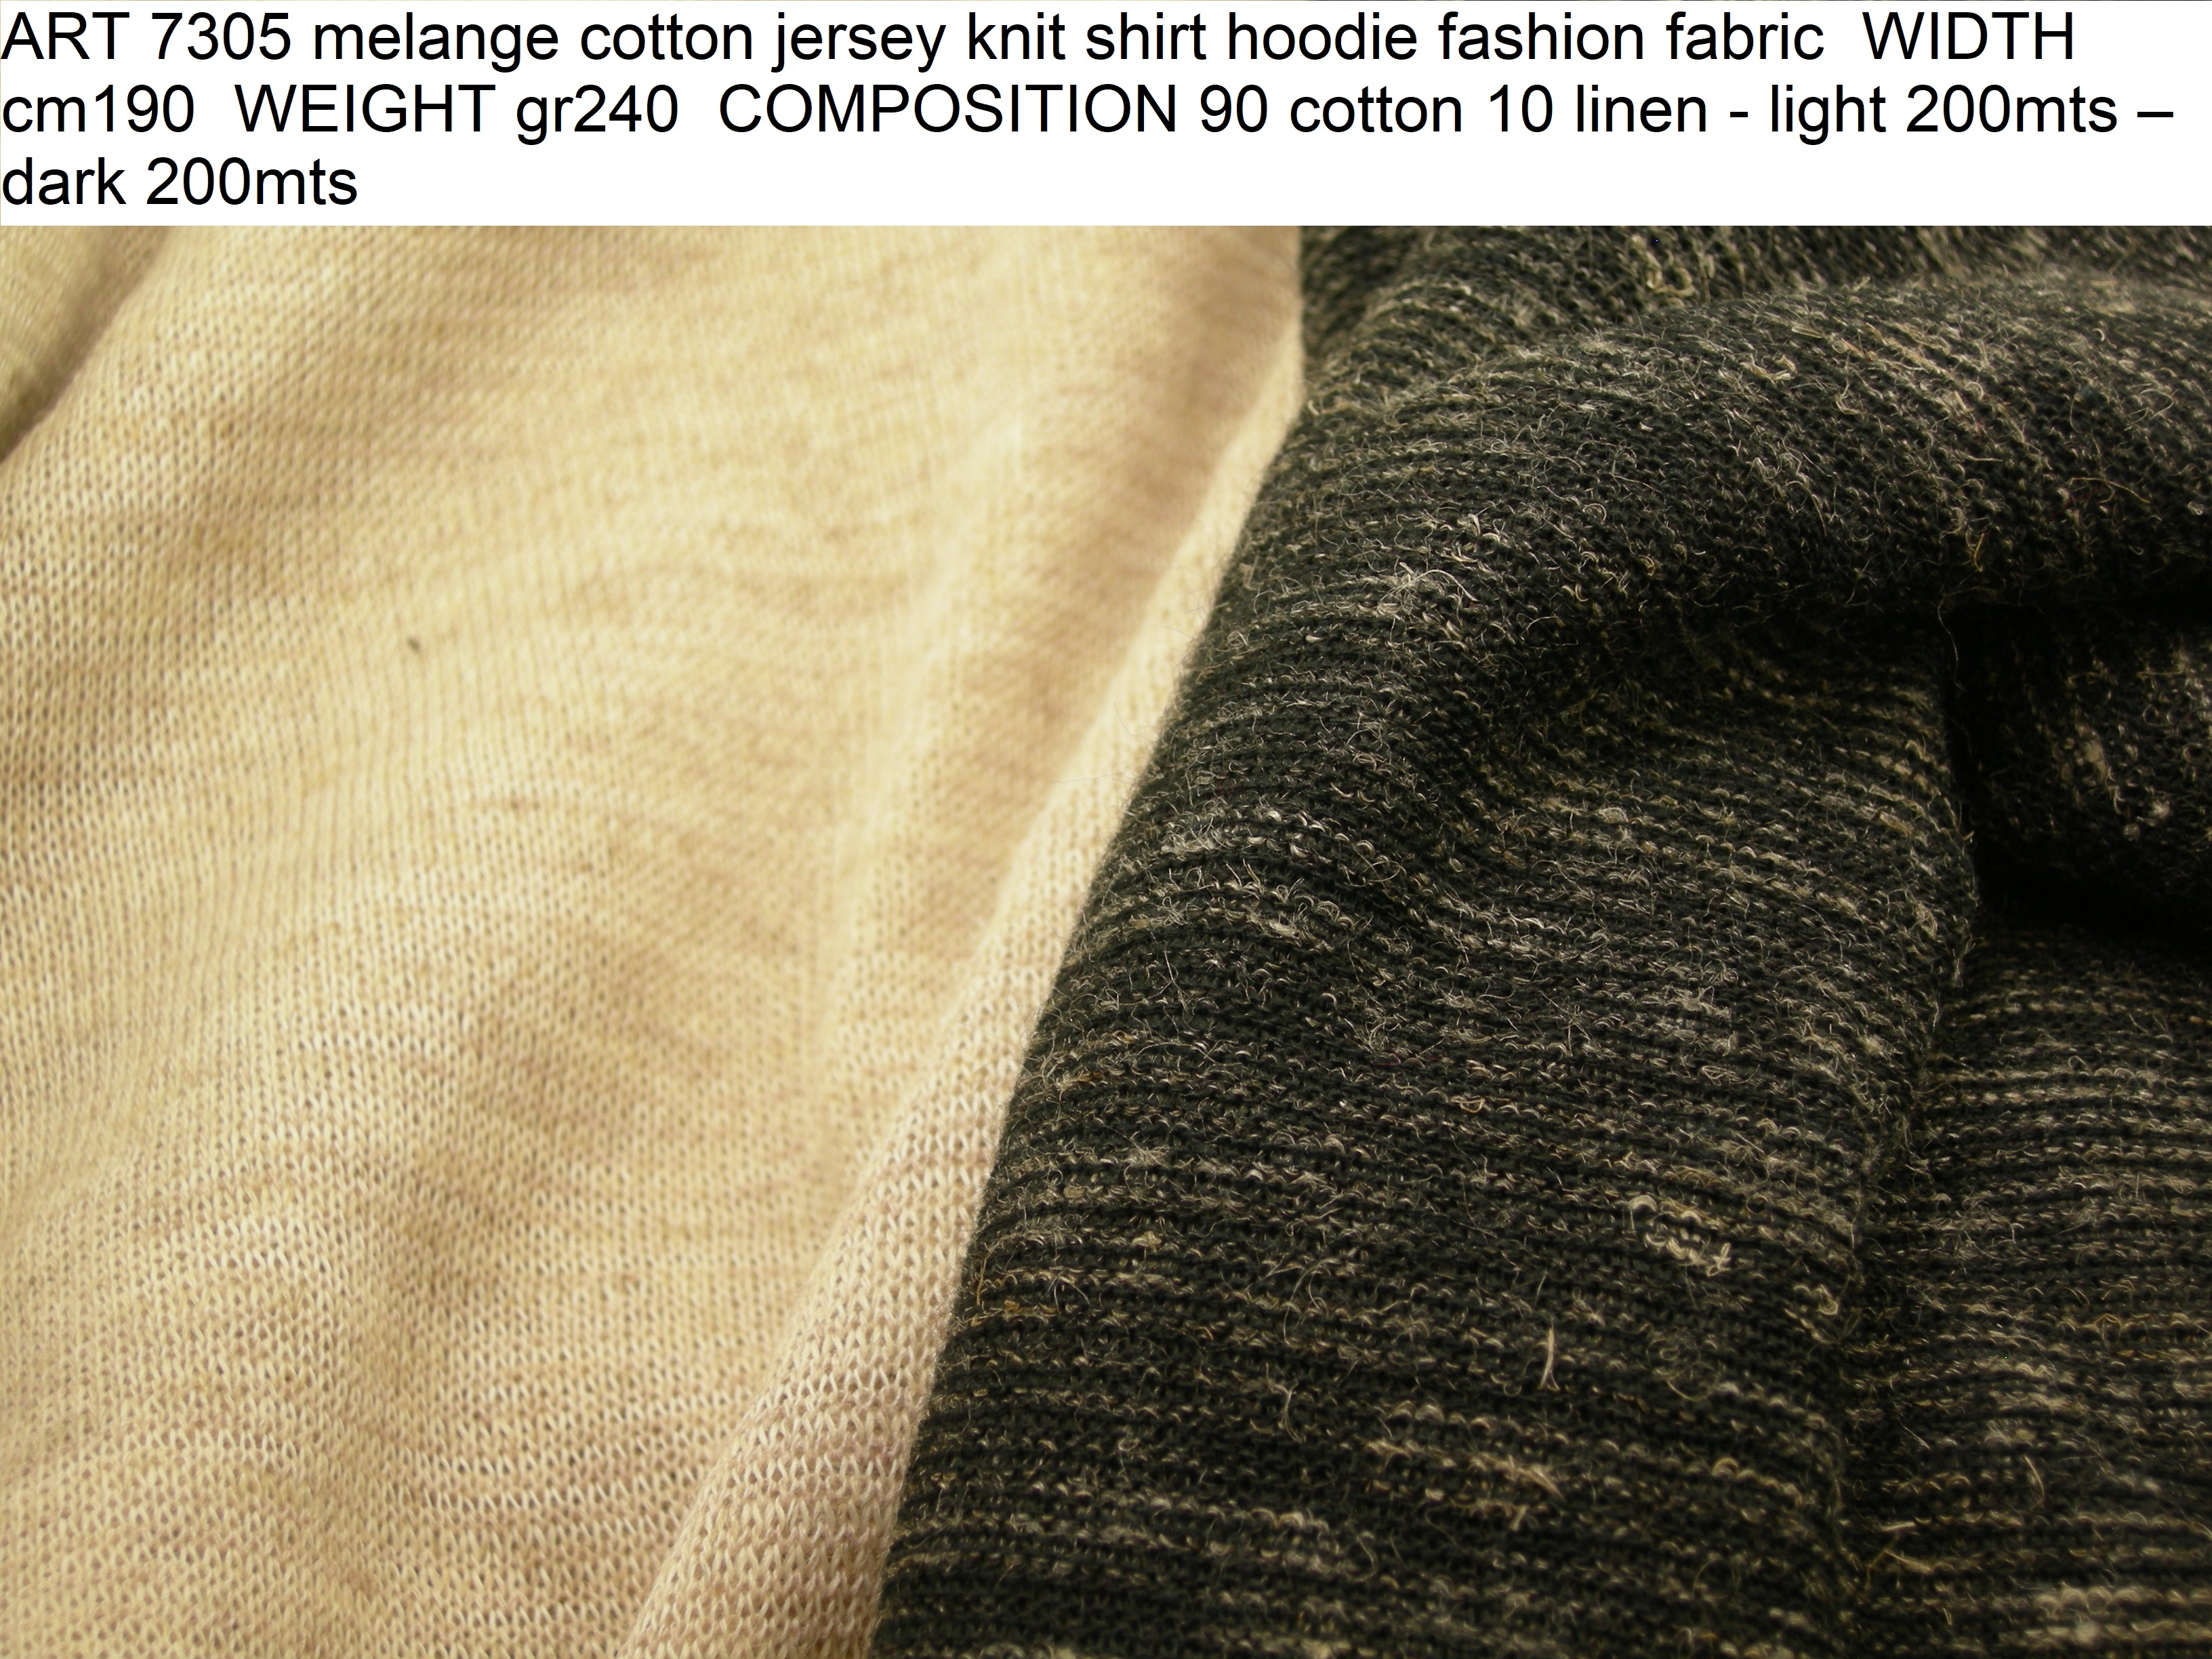 jersey fabric composition